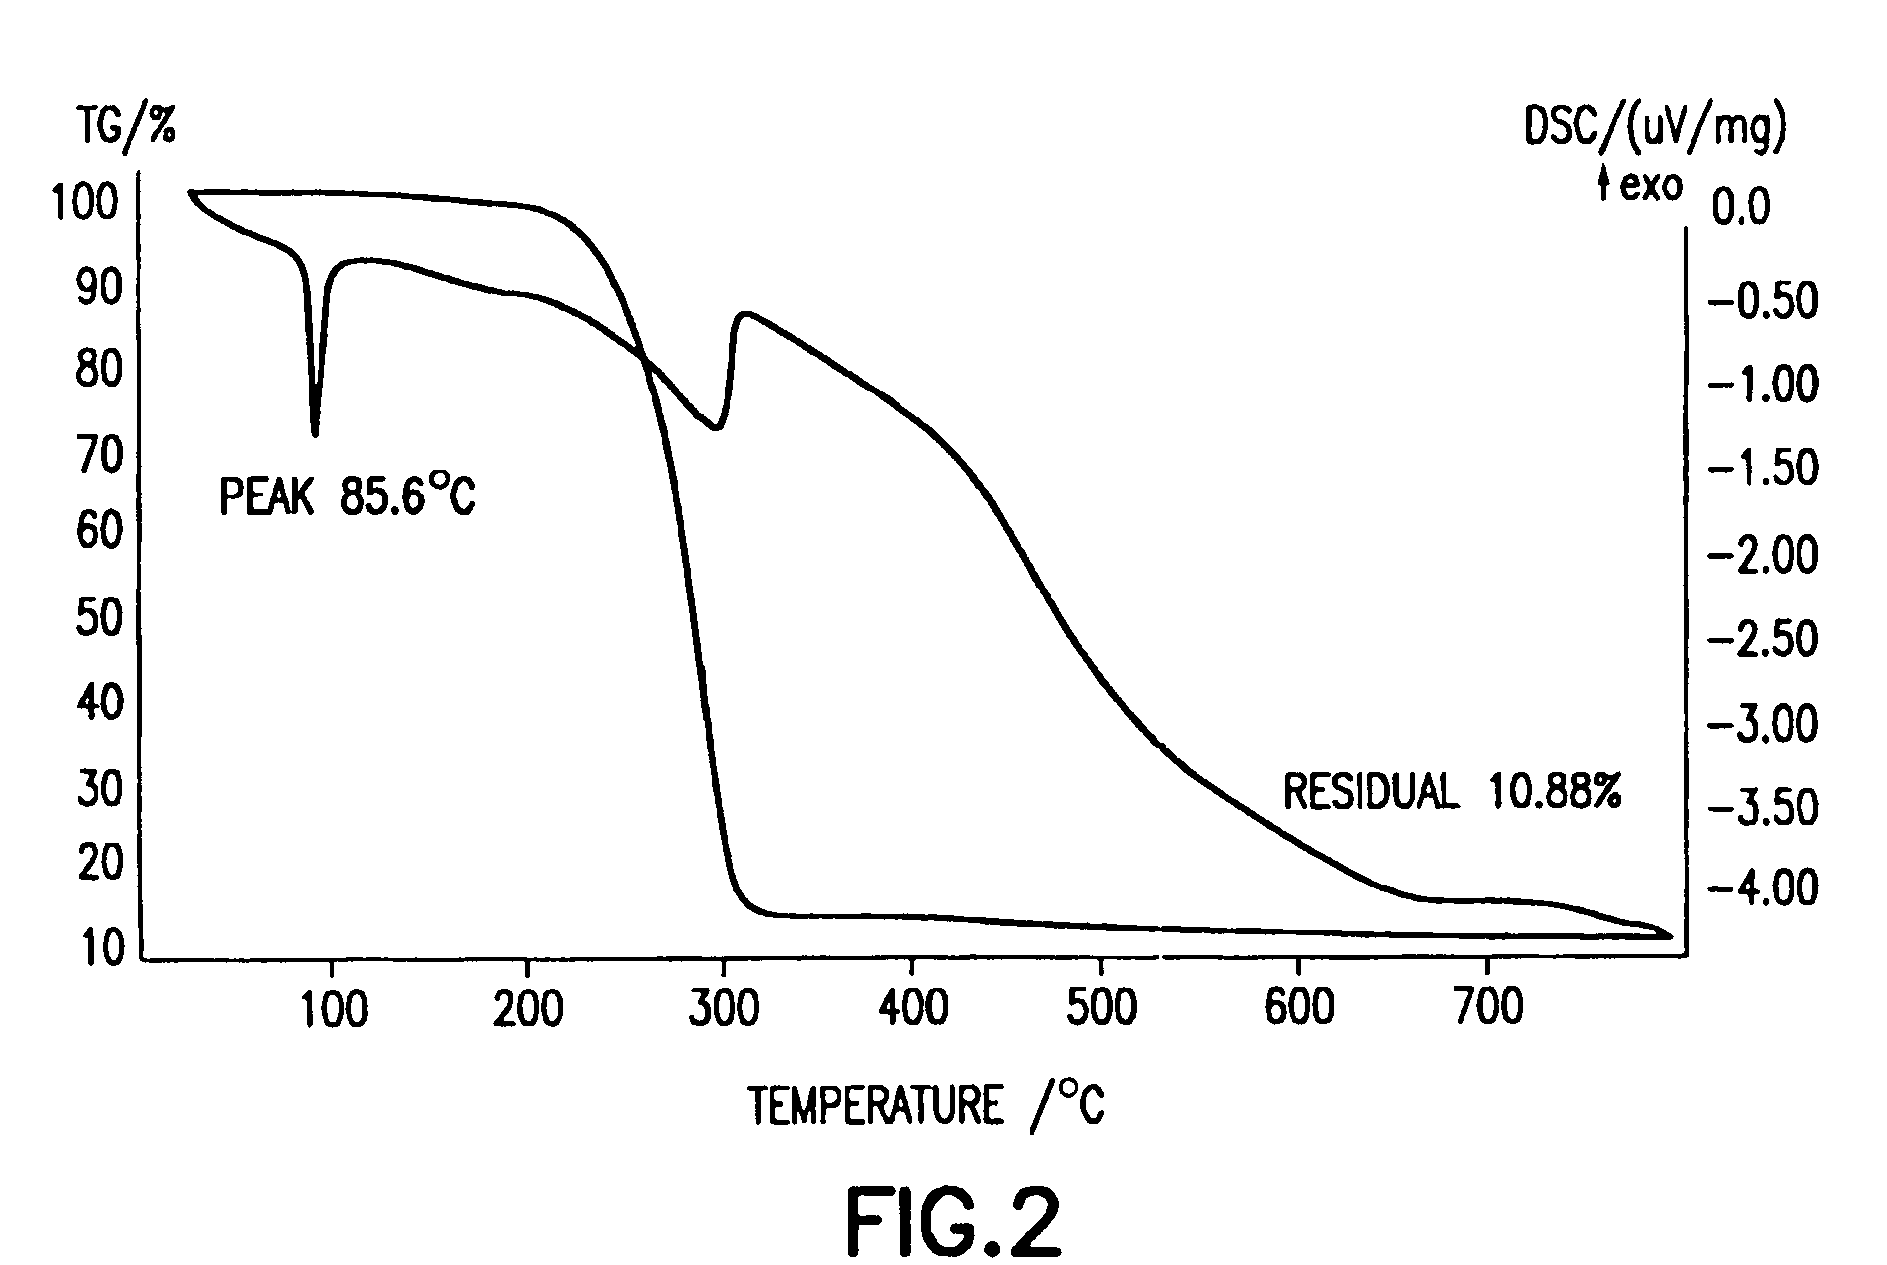 Precursor compositions for atomic layer deposition and chemical vapor deposition of titanate, lanthanate, and tantalate dielectric films